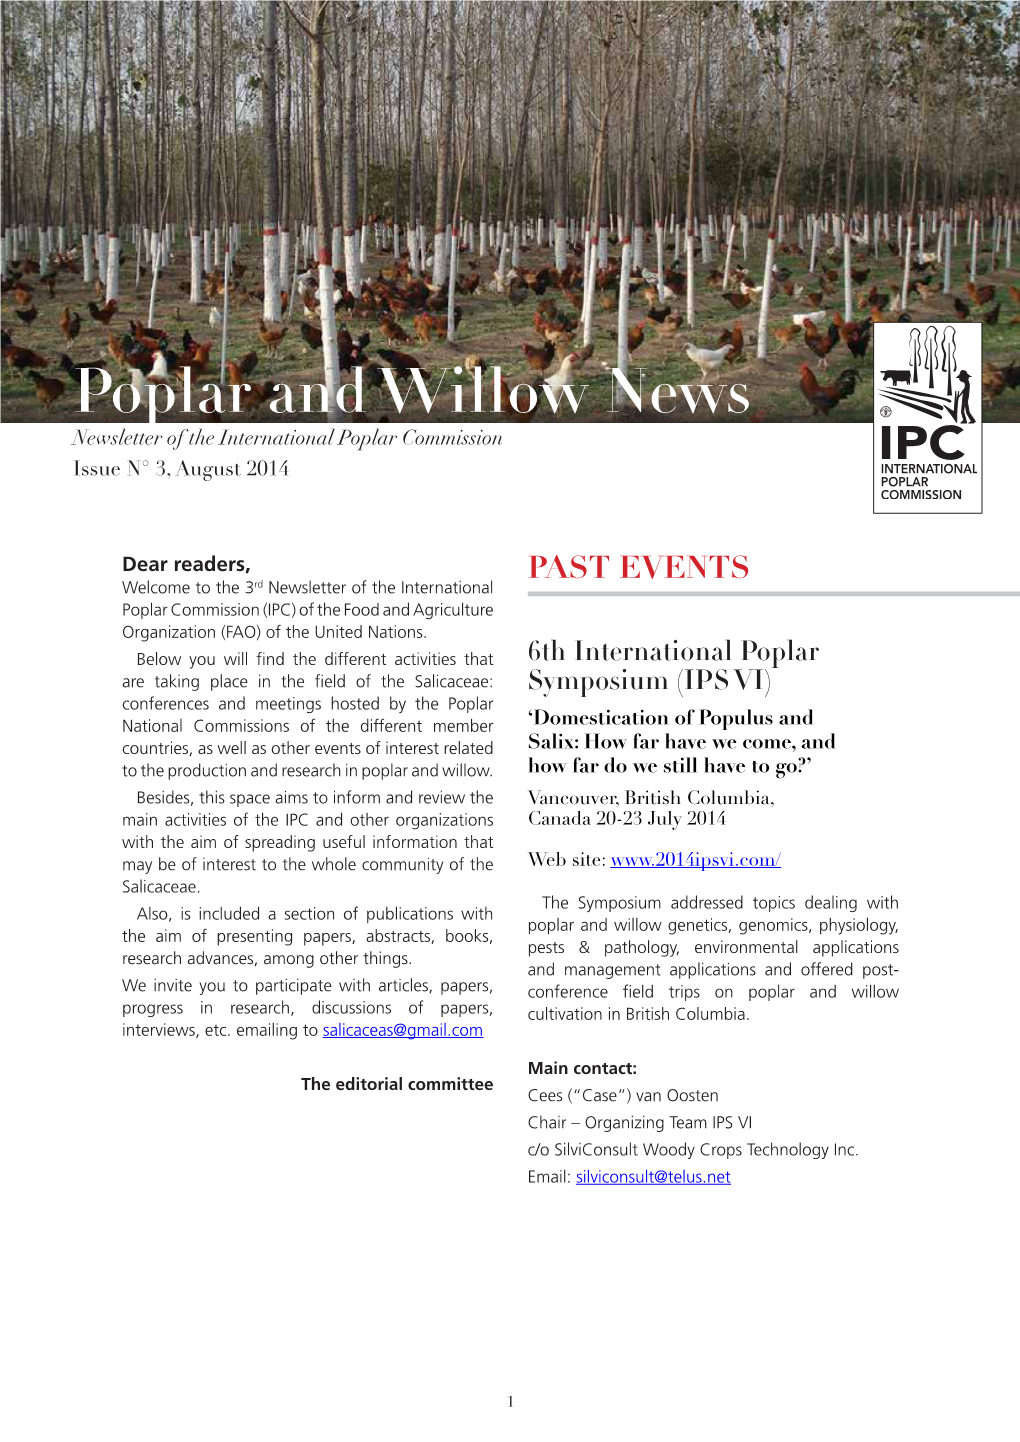 Poplar and Willow News, Issue No 3, August 2014